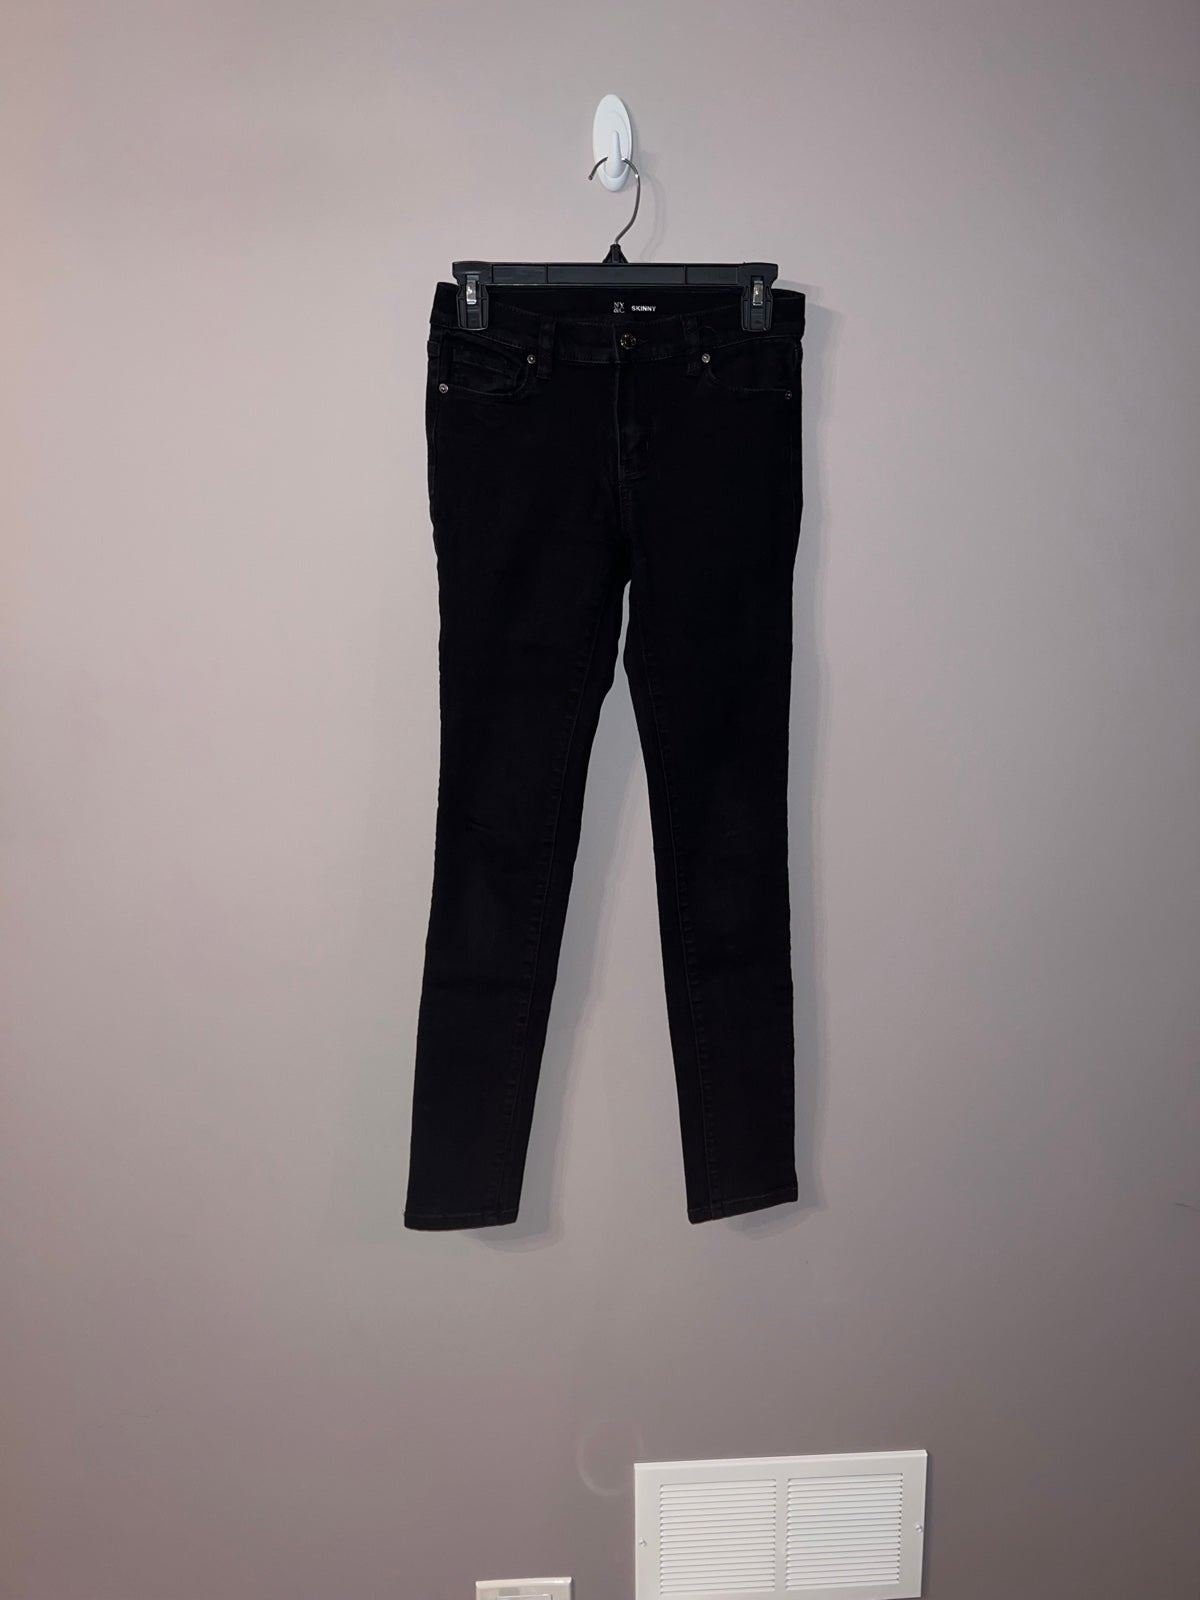 Special offer  NY&C black jeans skinny 0 hZCFYbE3n Disc